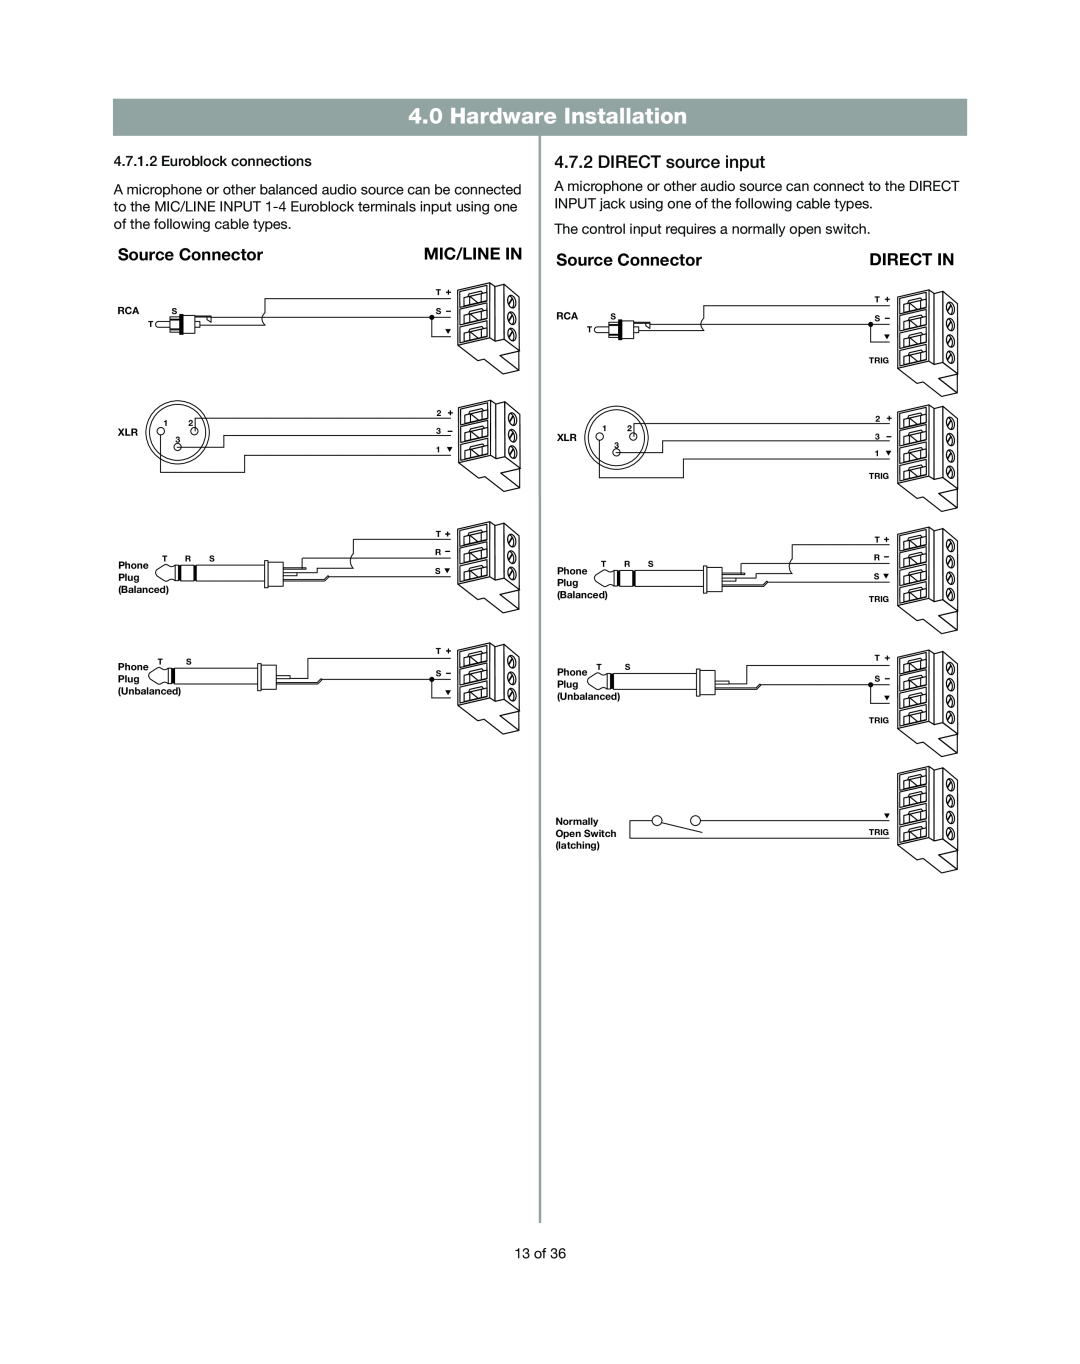 Bose DXA2120 manual Hardware Installation, DIRECT source input, Source Connector, Mic/Line In, Direct In 